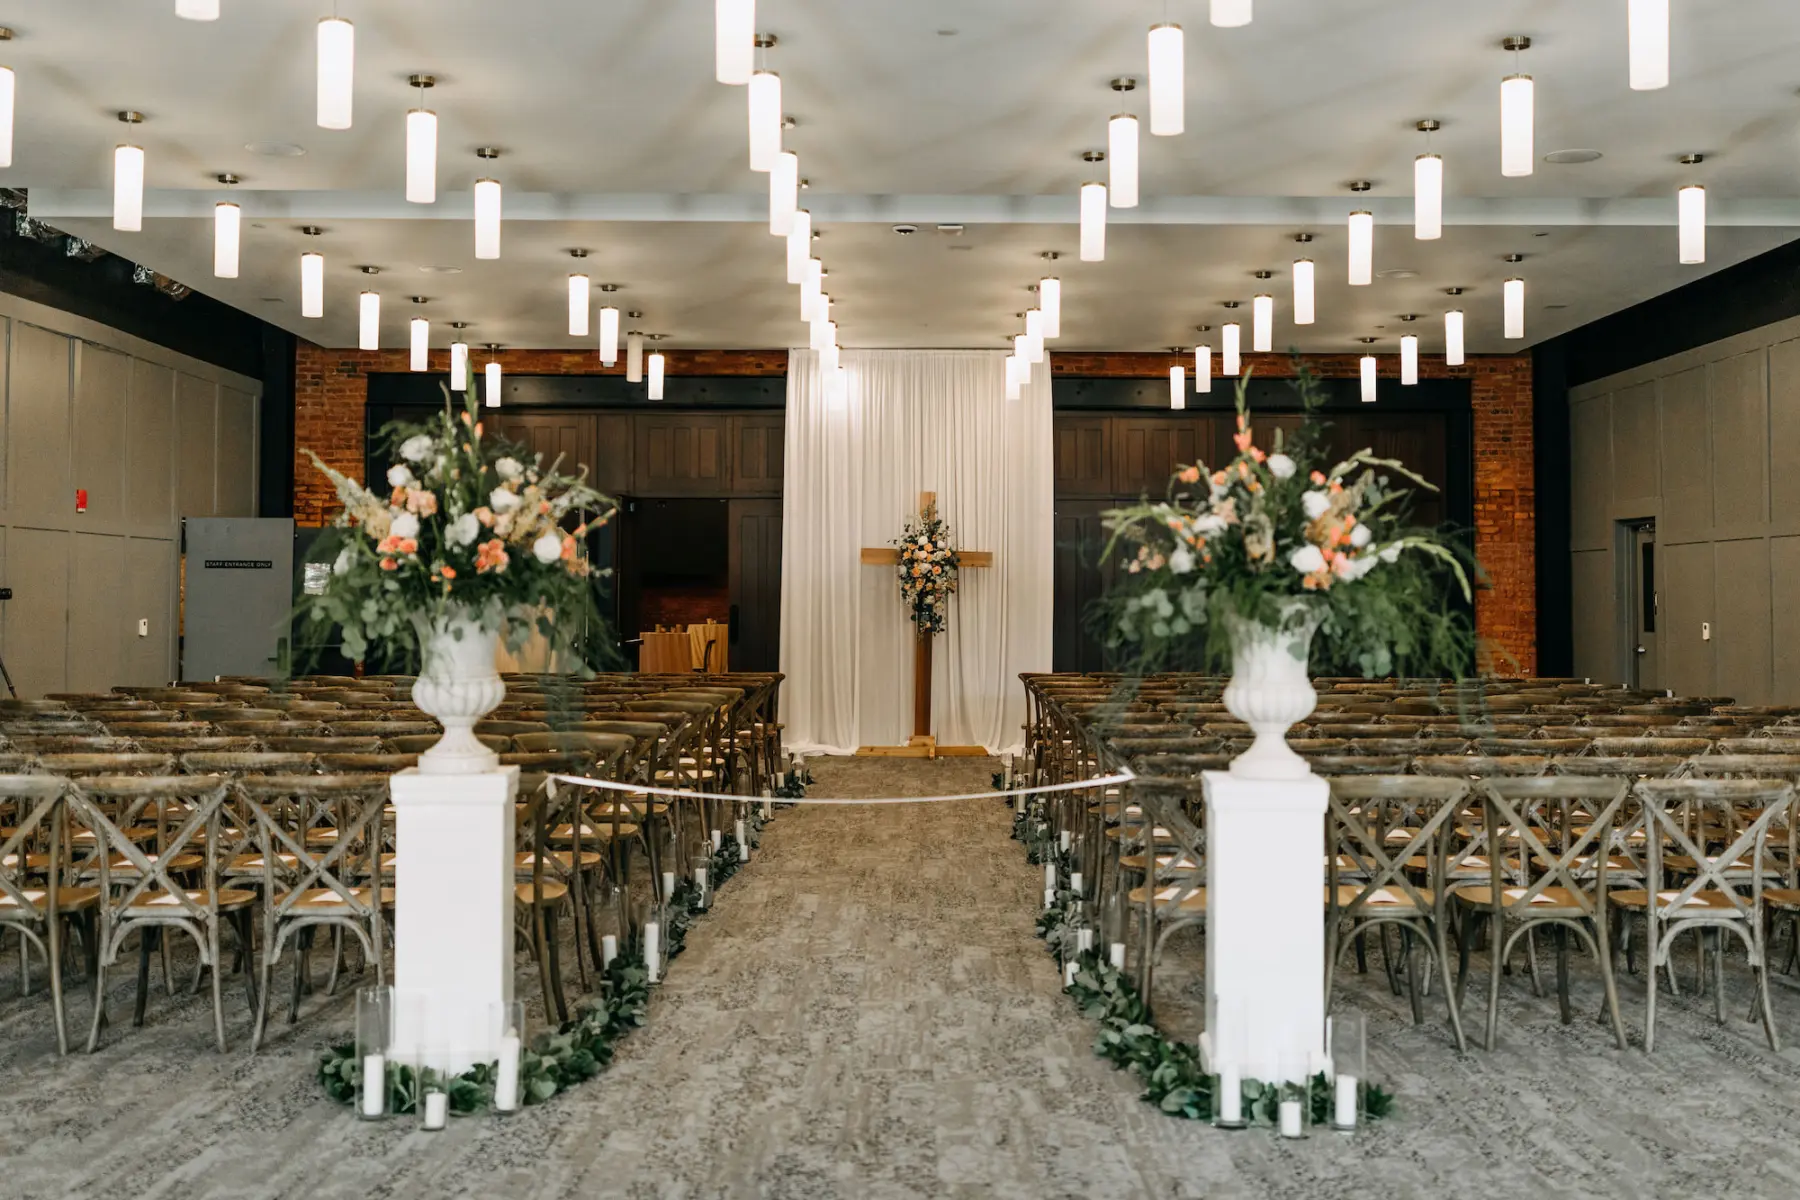 Classic White and Greenery Wedding Ceremony Floral Inspiration with Cross at Altar | Tampa Florist Save the Date Florida | Planner B Eventful